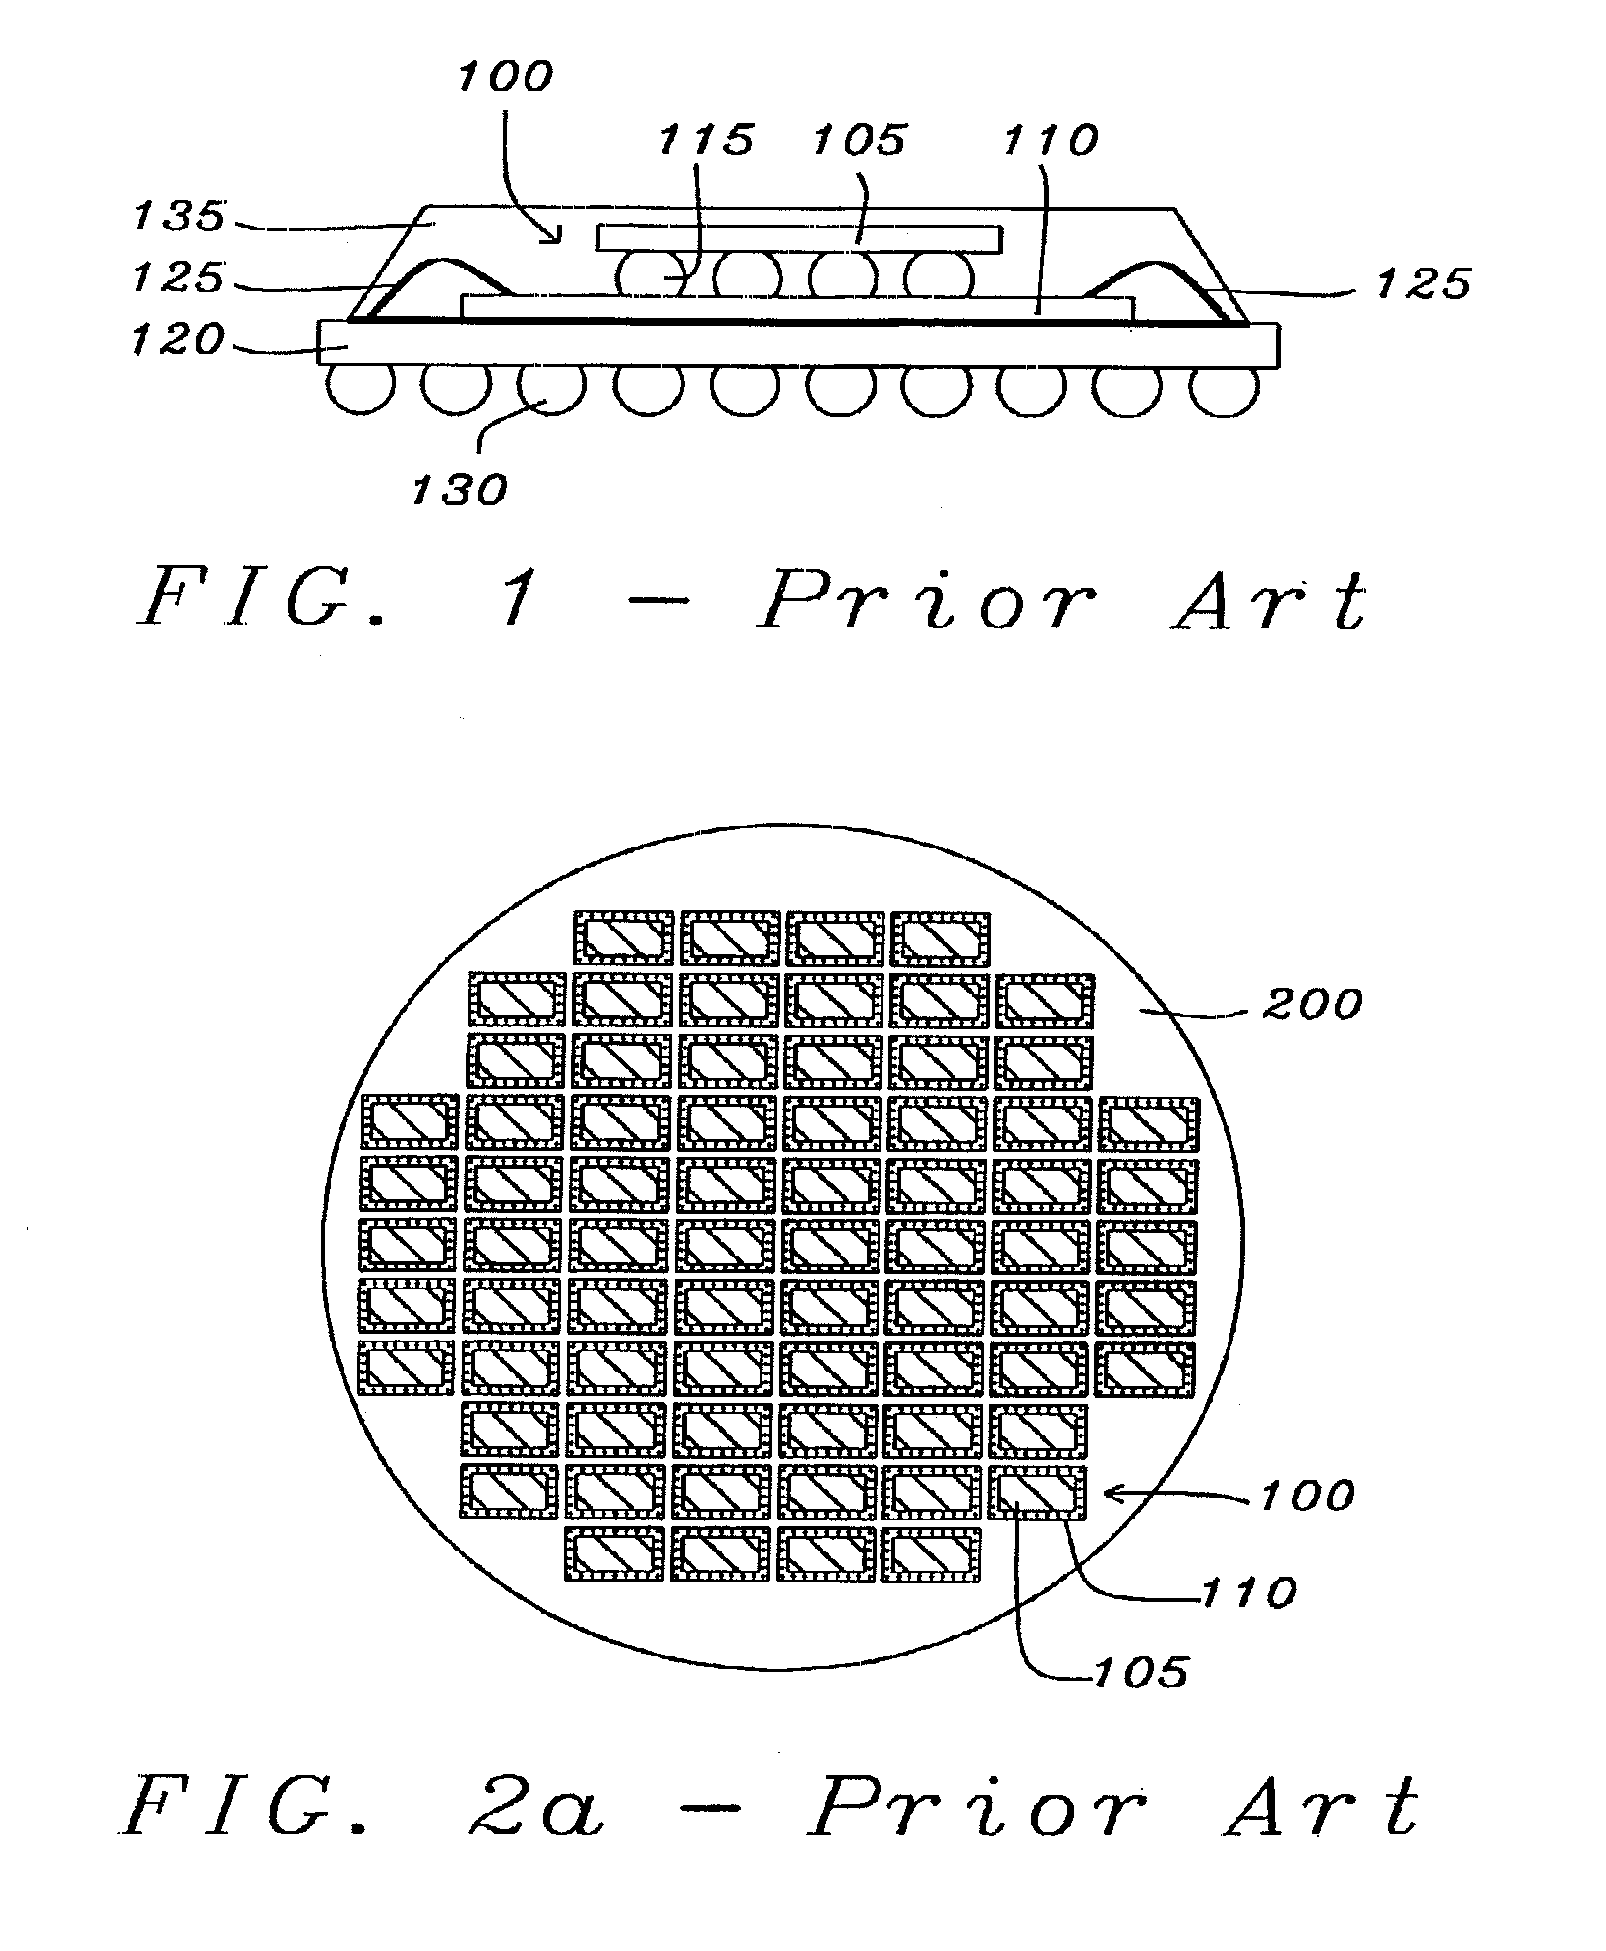 High performance sub-system design and assembly